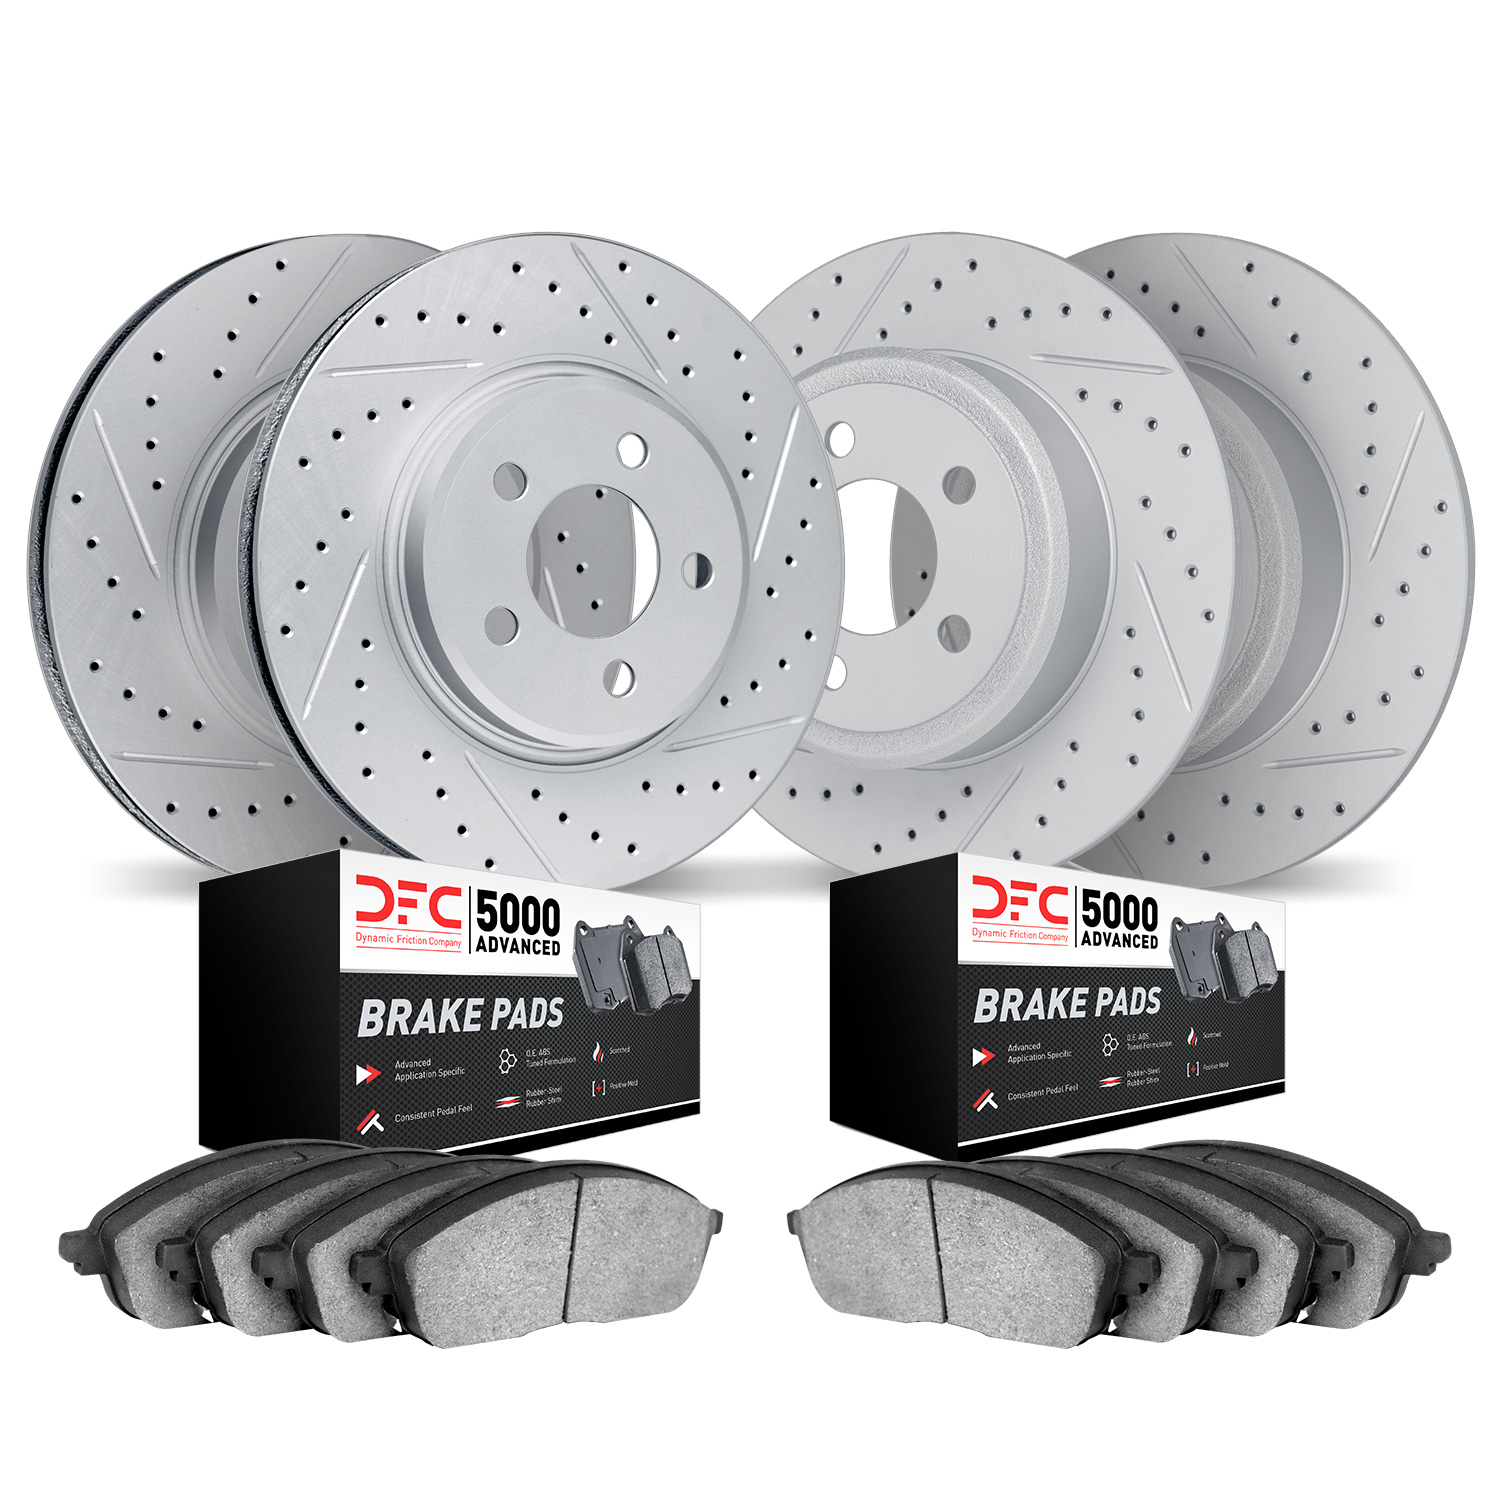 2504-45027 Geoperformance Drilled/Slotted Rotors w/5000 Advanced Brake Pads Kit, 2011-2016 GM, Position: Front and Rear